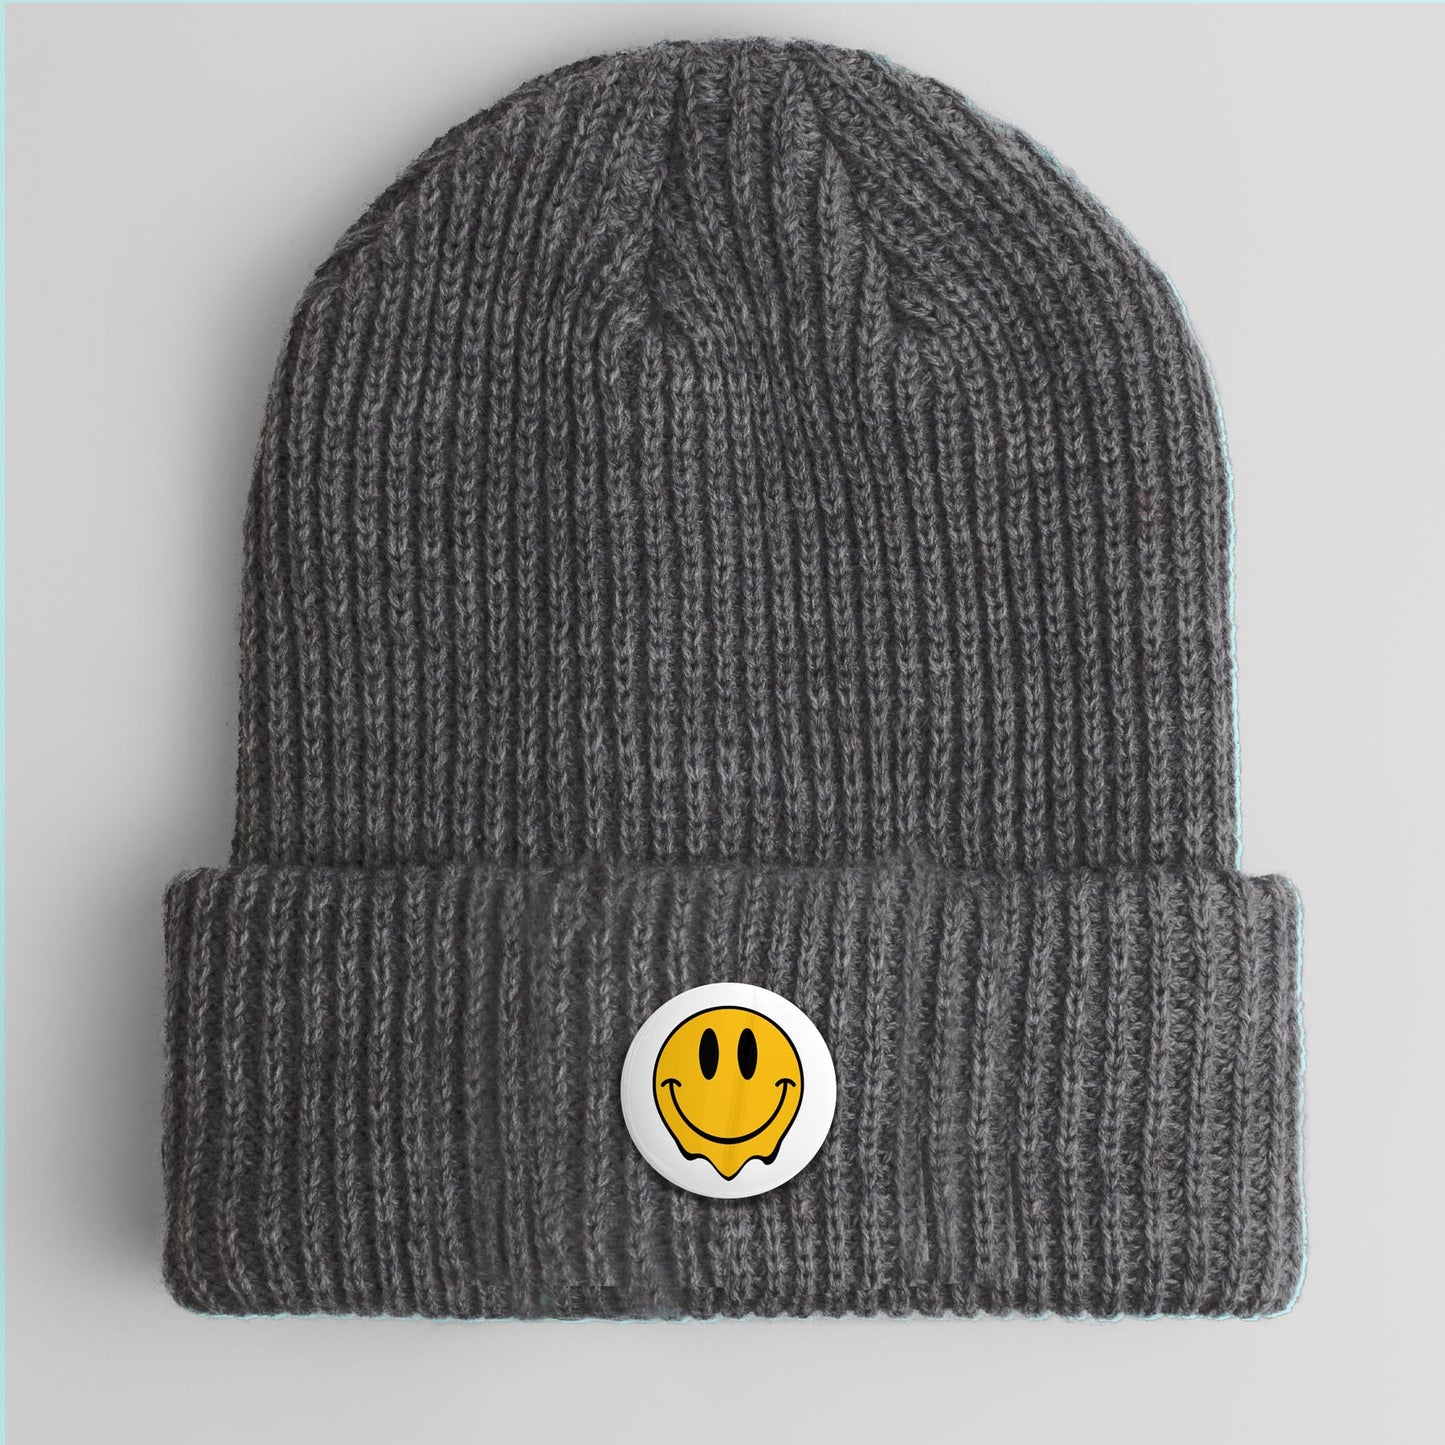 Beanie with Buttons